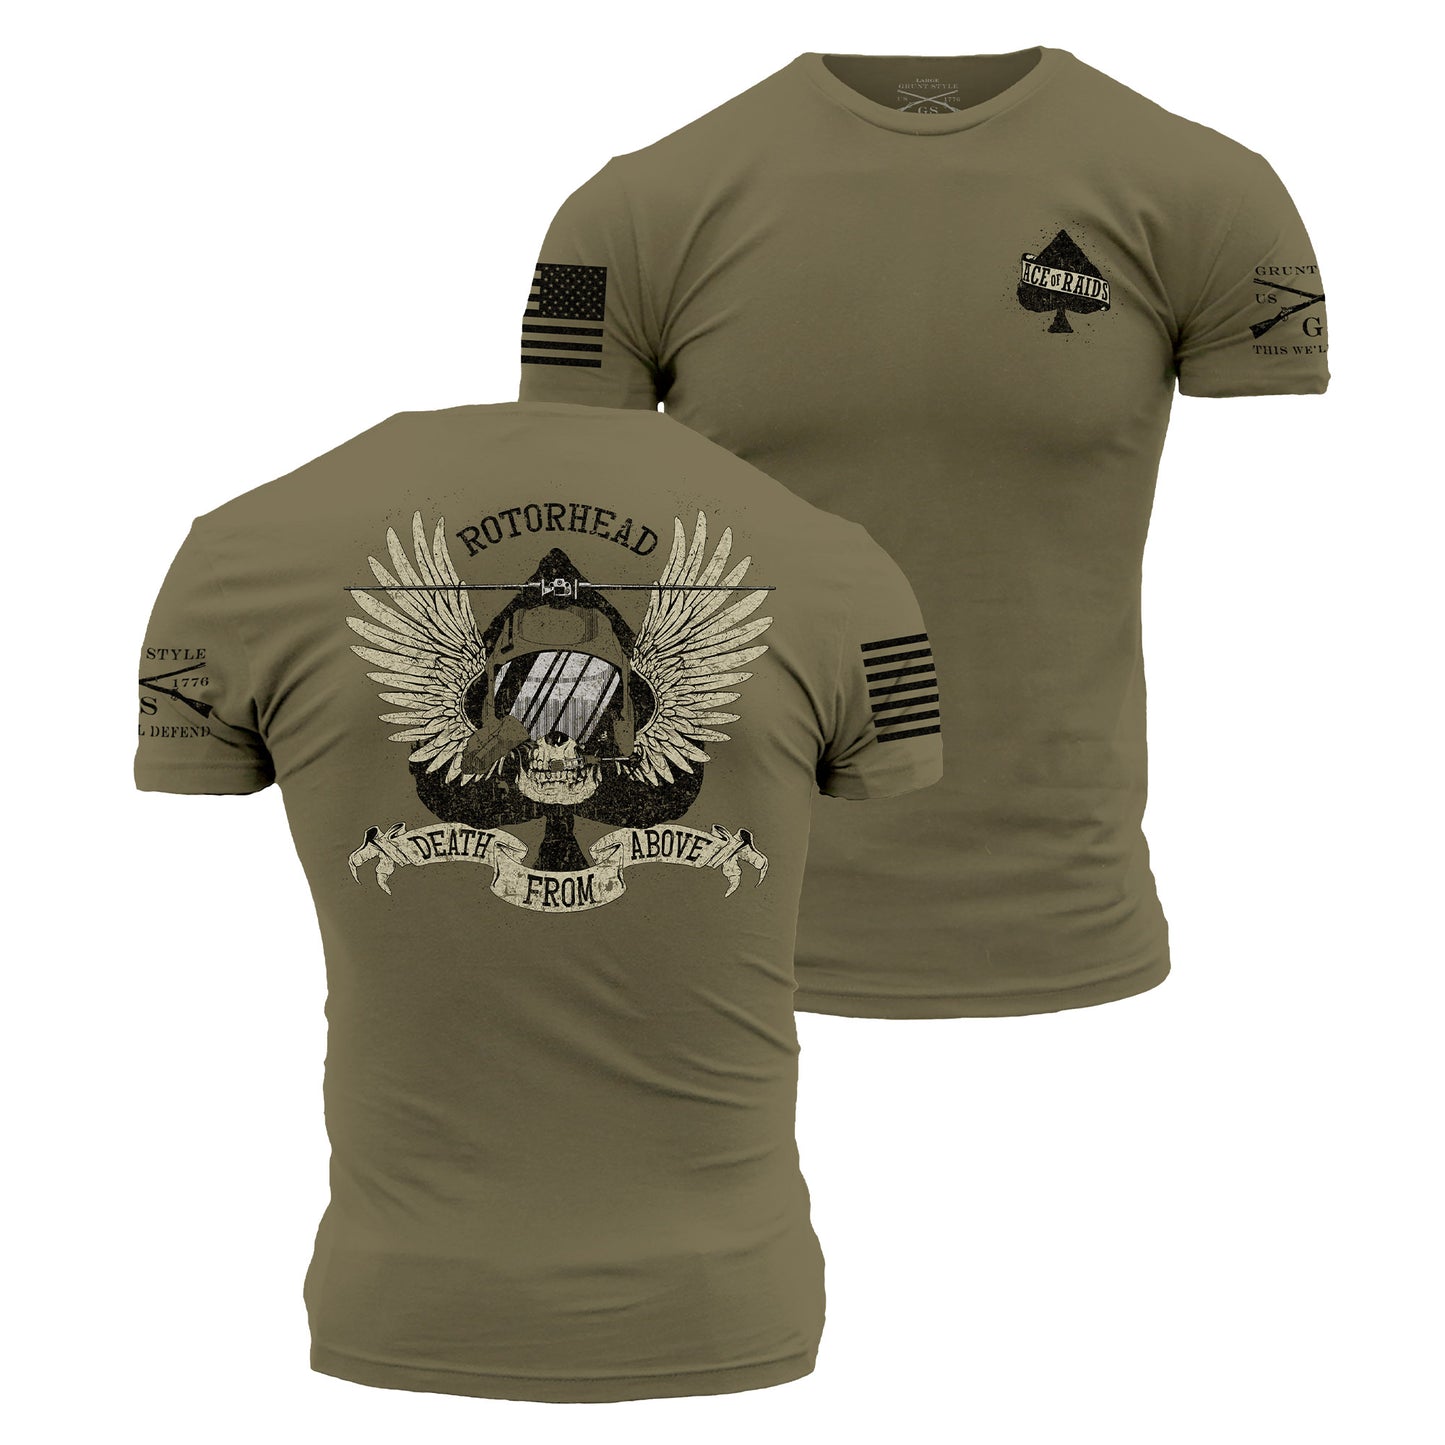 Death From Above T-Shirt - Military Green